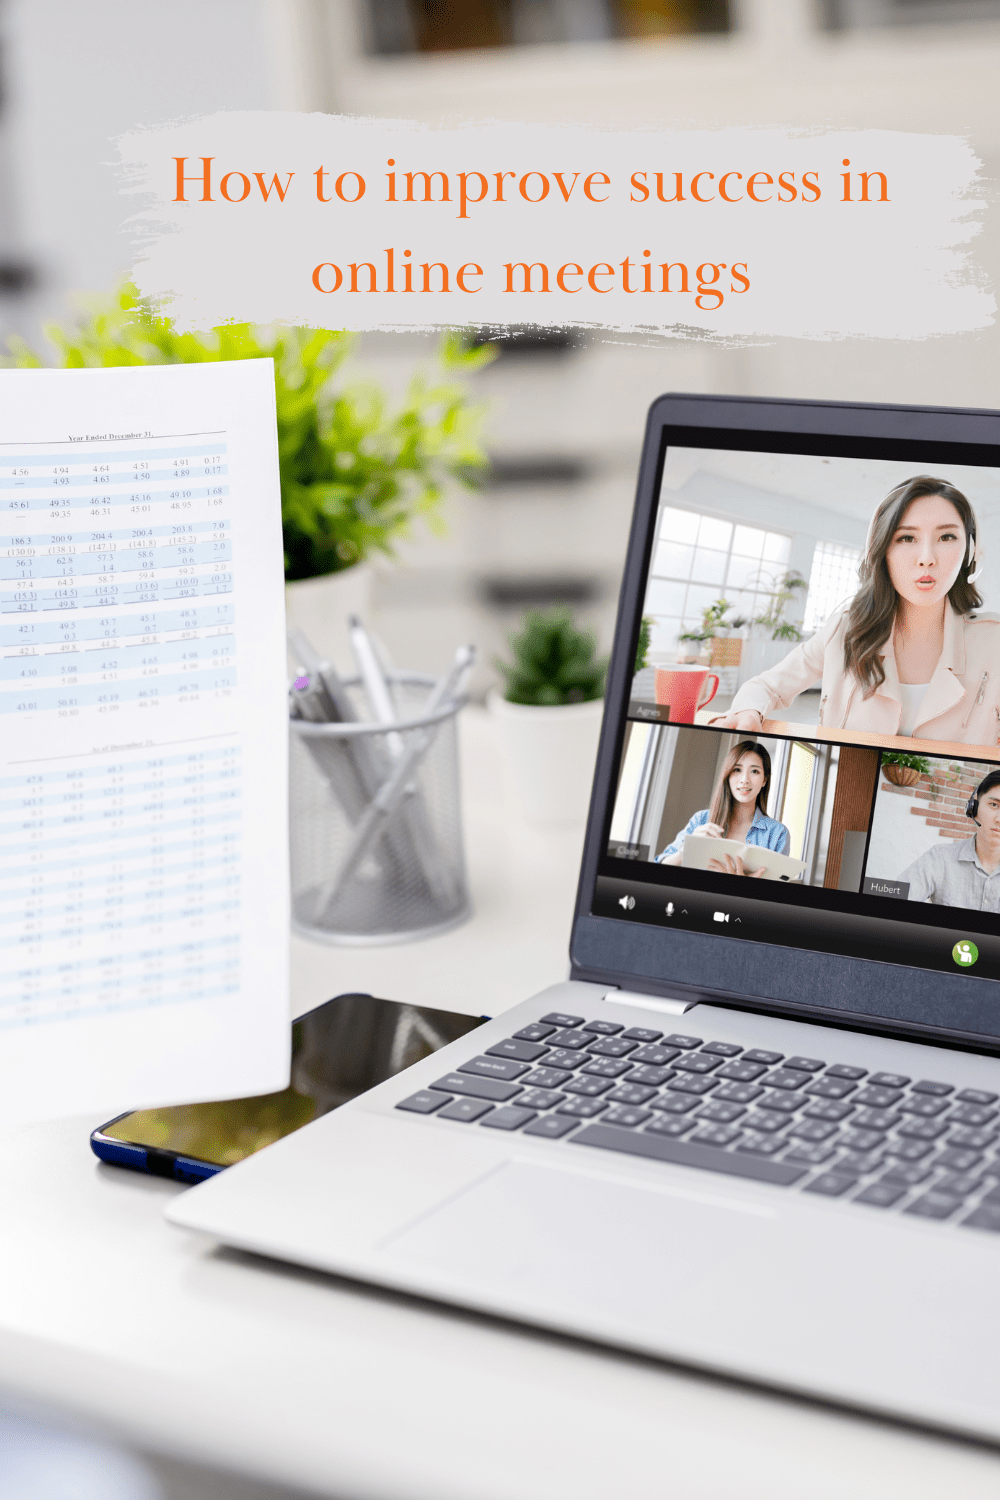 How to improve success in online meetings